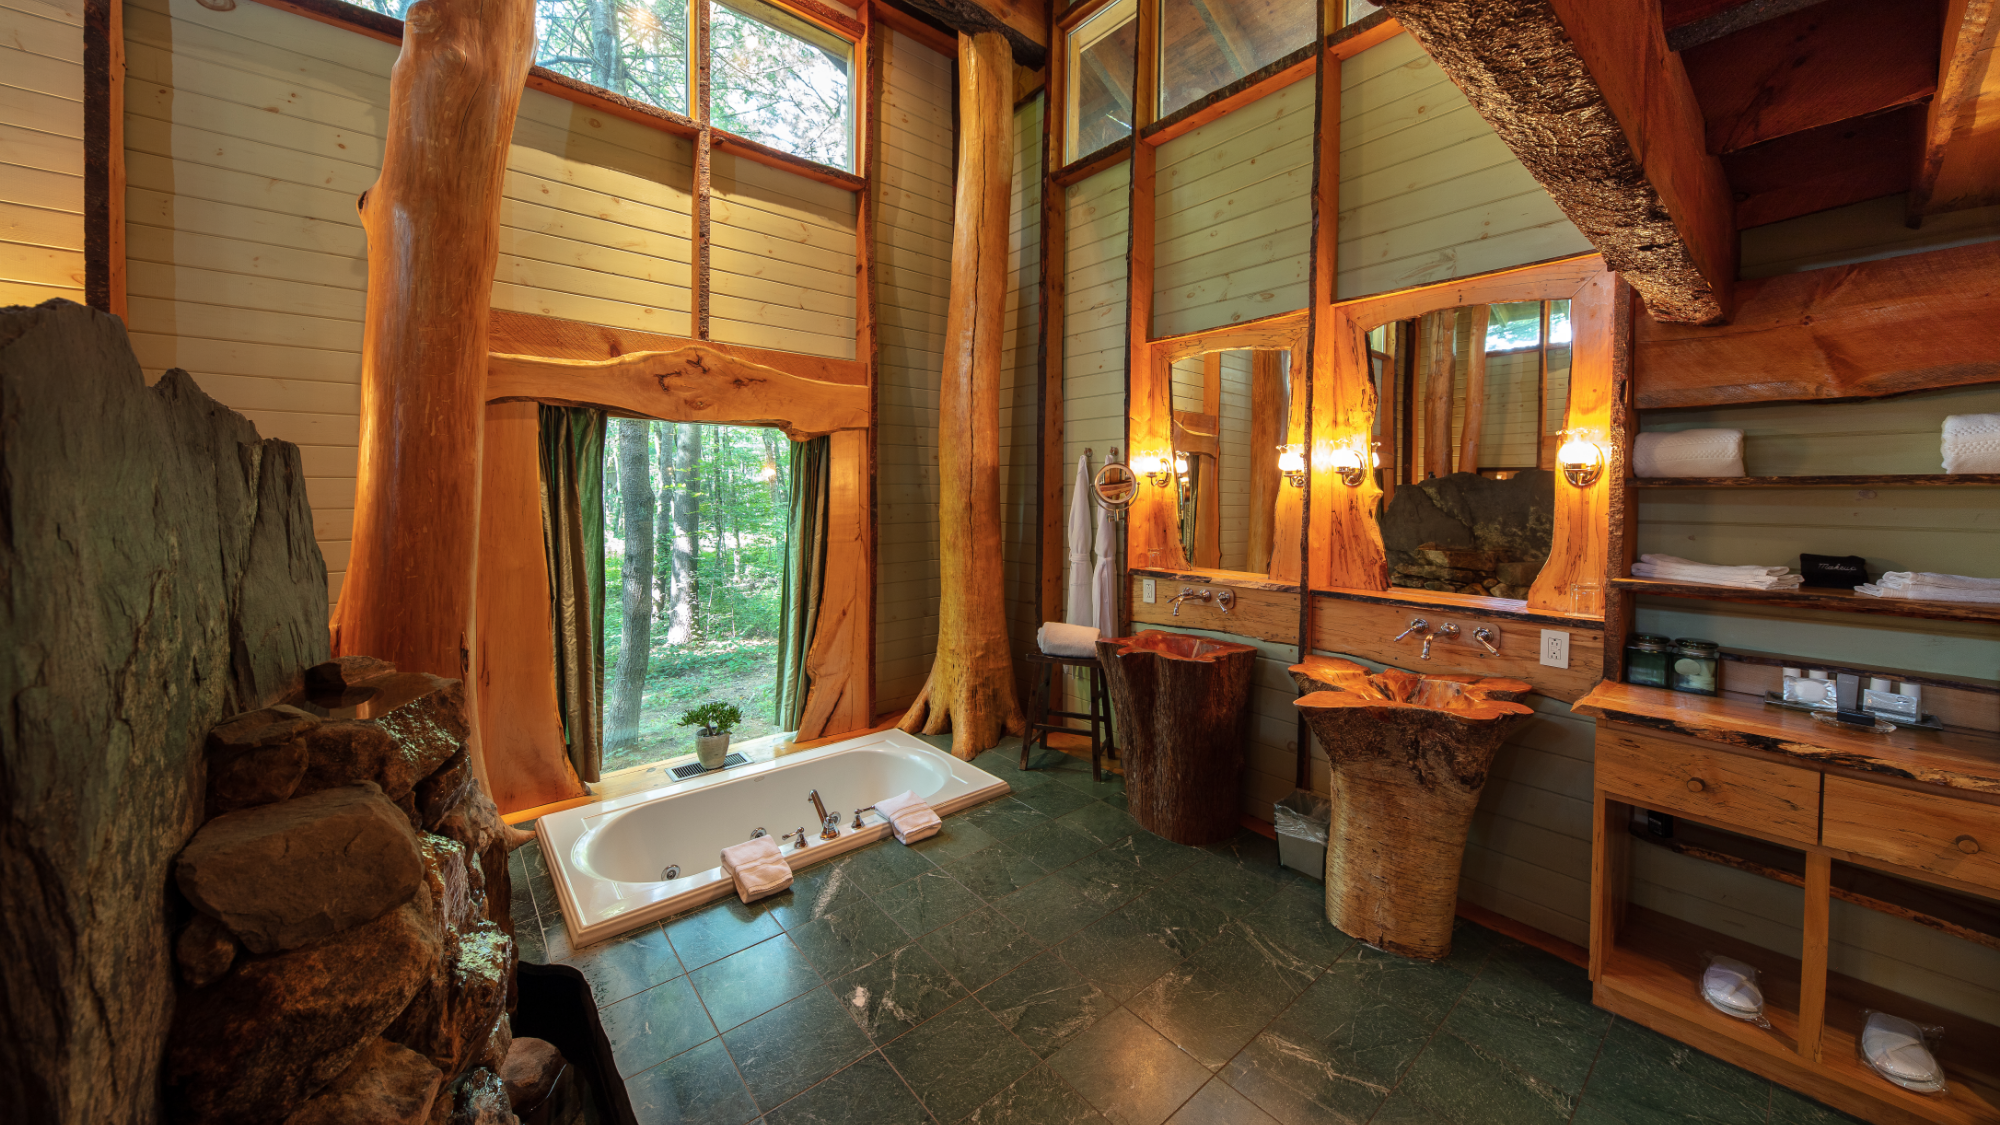 Luxurious bathroom with natural wood decor and large windows at Winvian Farm.